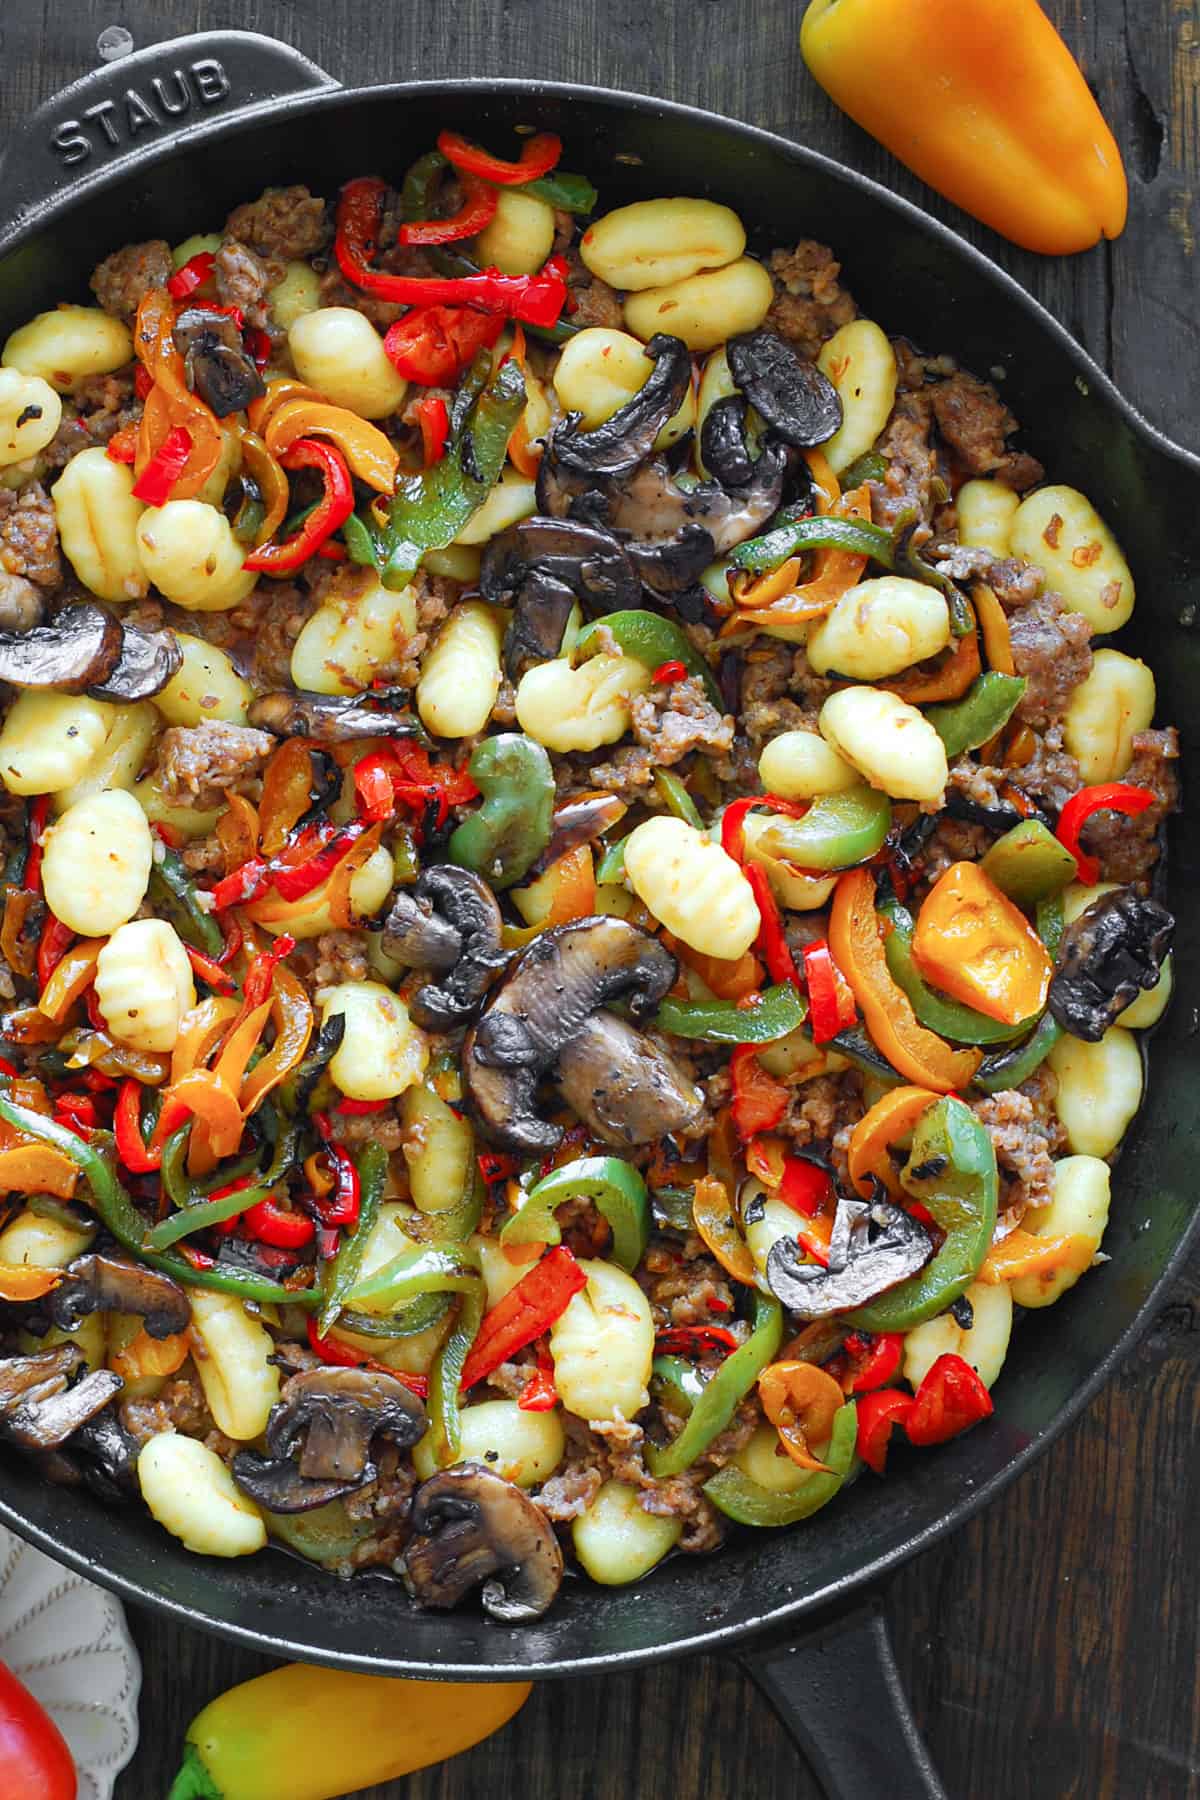 Spicy Italian Sausage Gnocchi with Mushrooms and Bell Peppers - in a cast iron skillet.